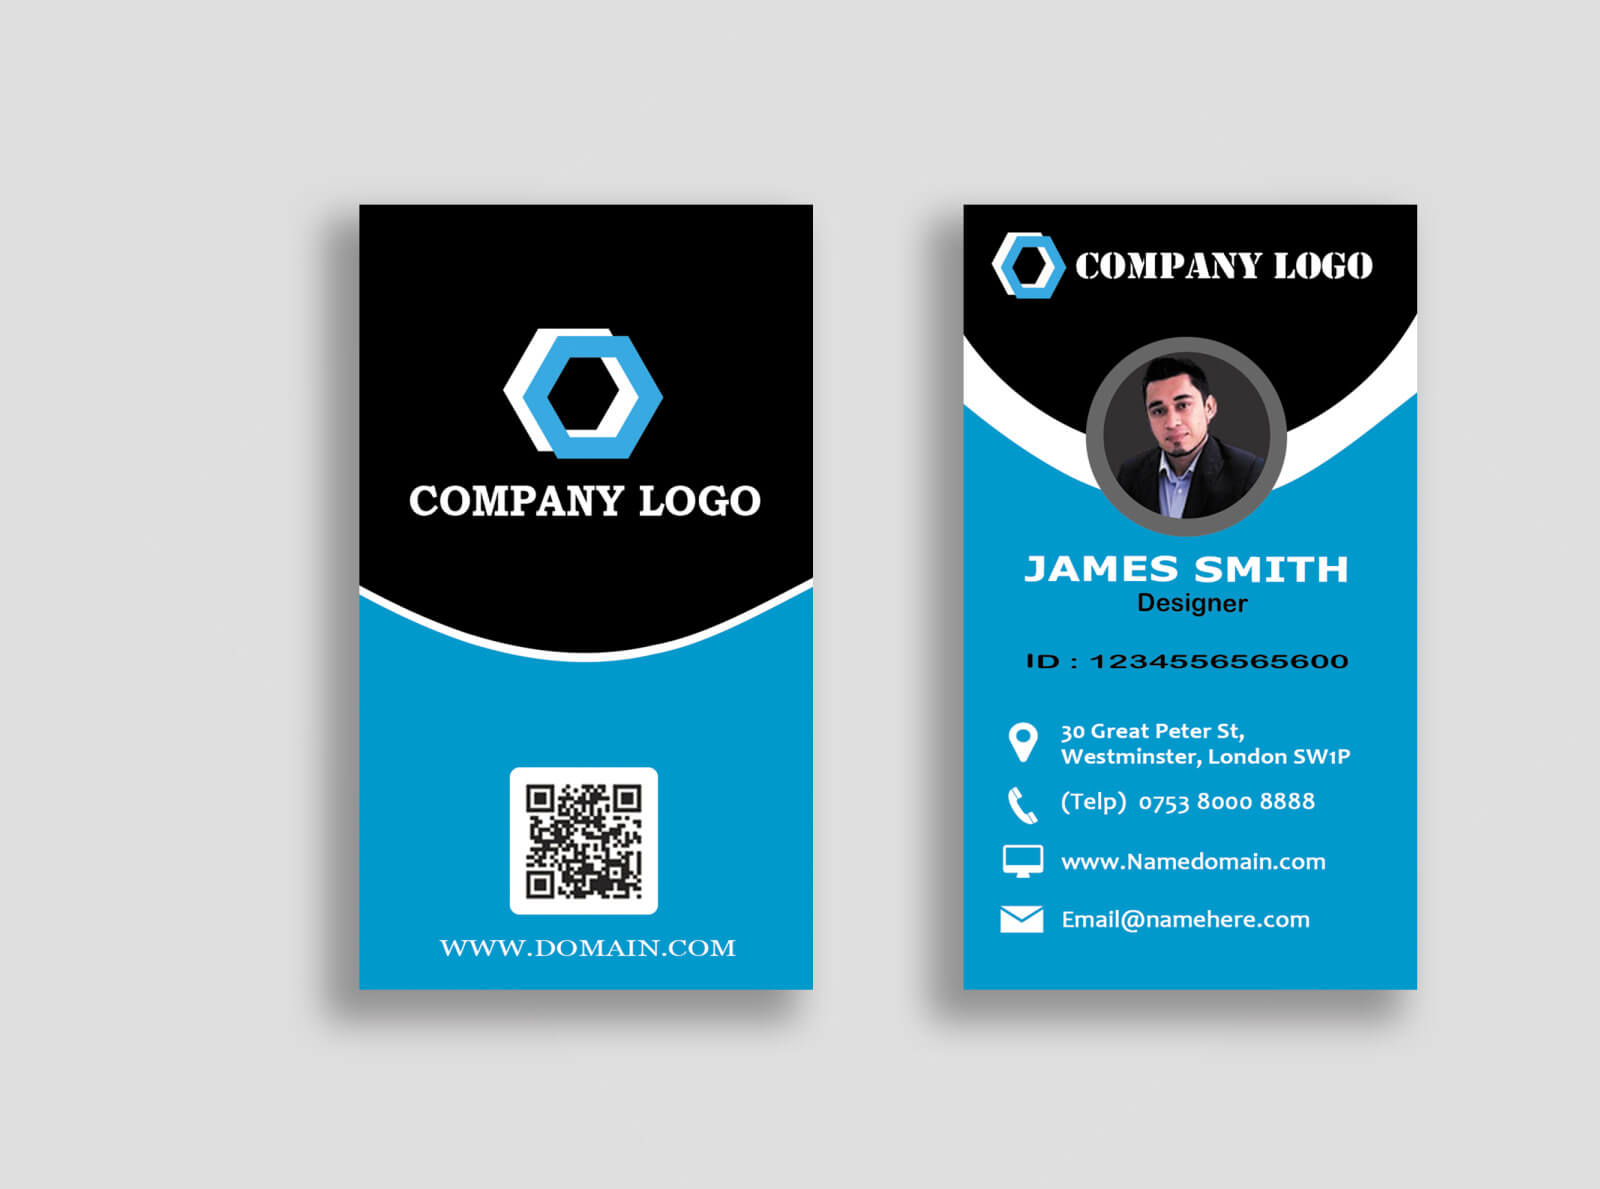 Personal Business Cards Templatepolah Design On Dribbble In Personal Identification Card Template